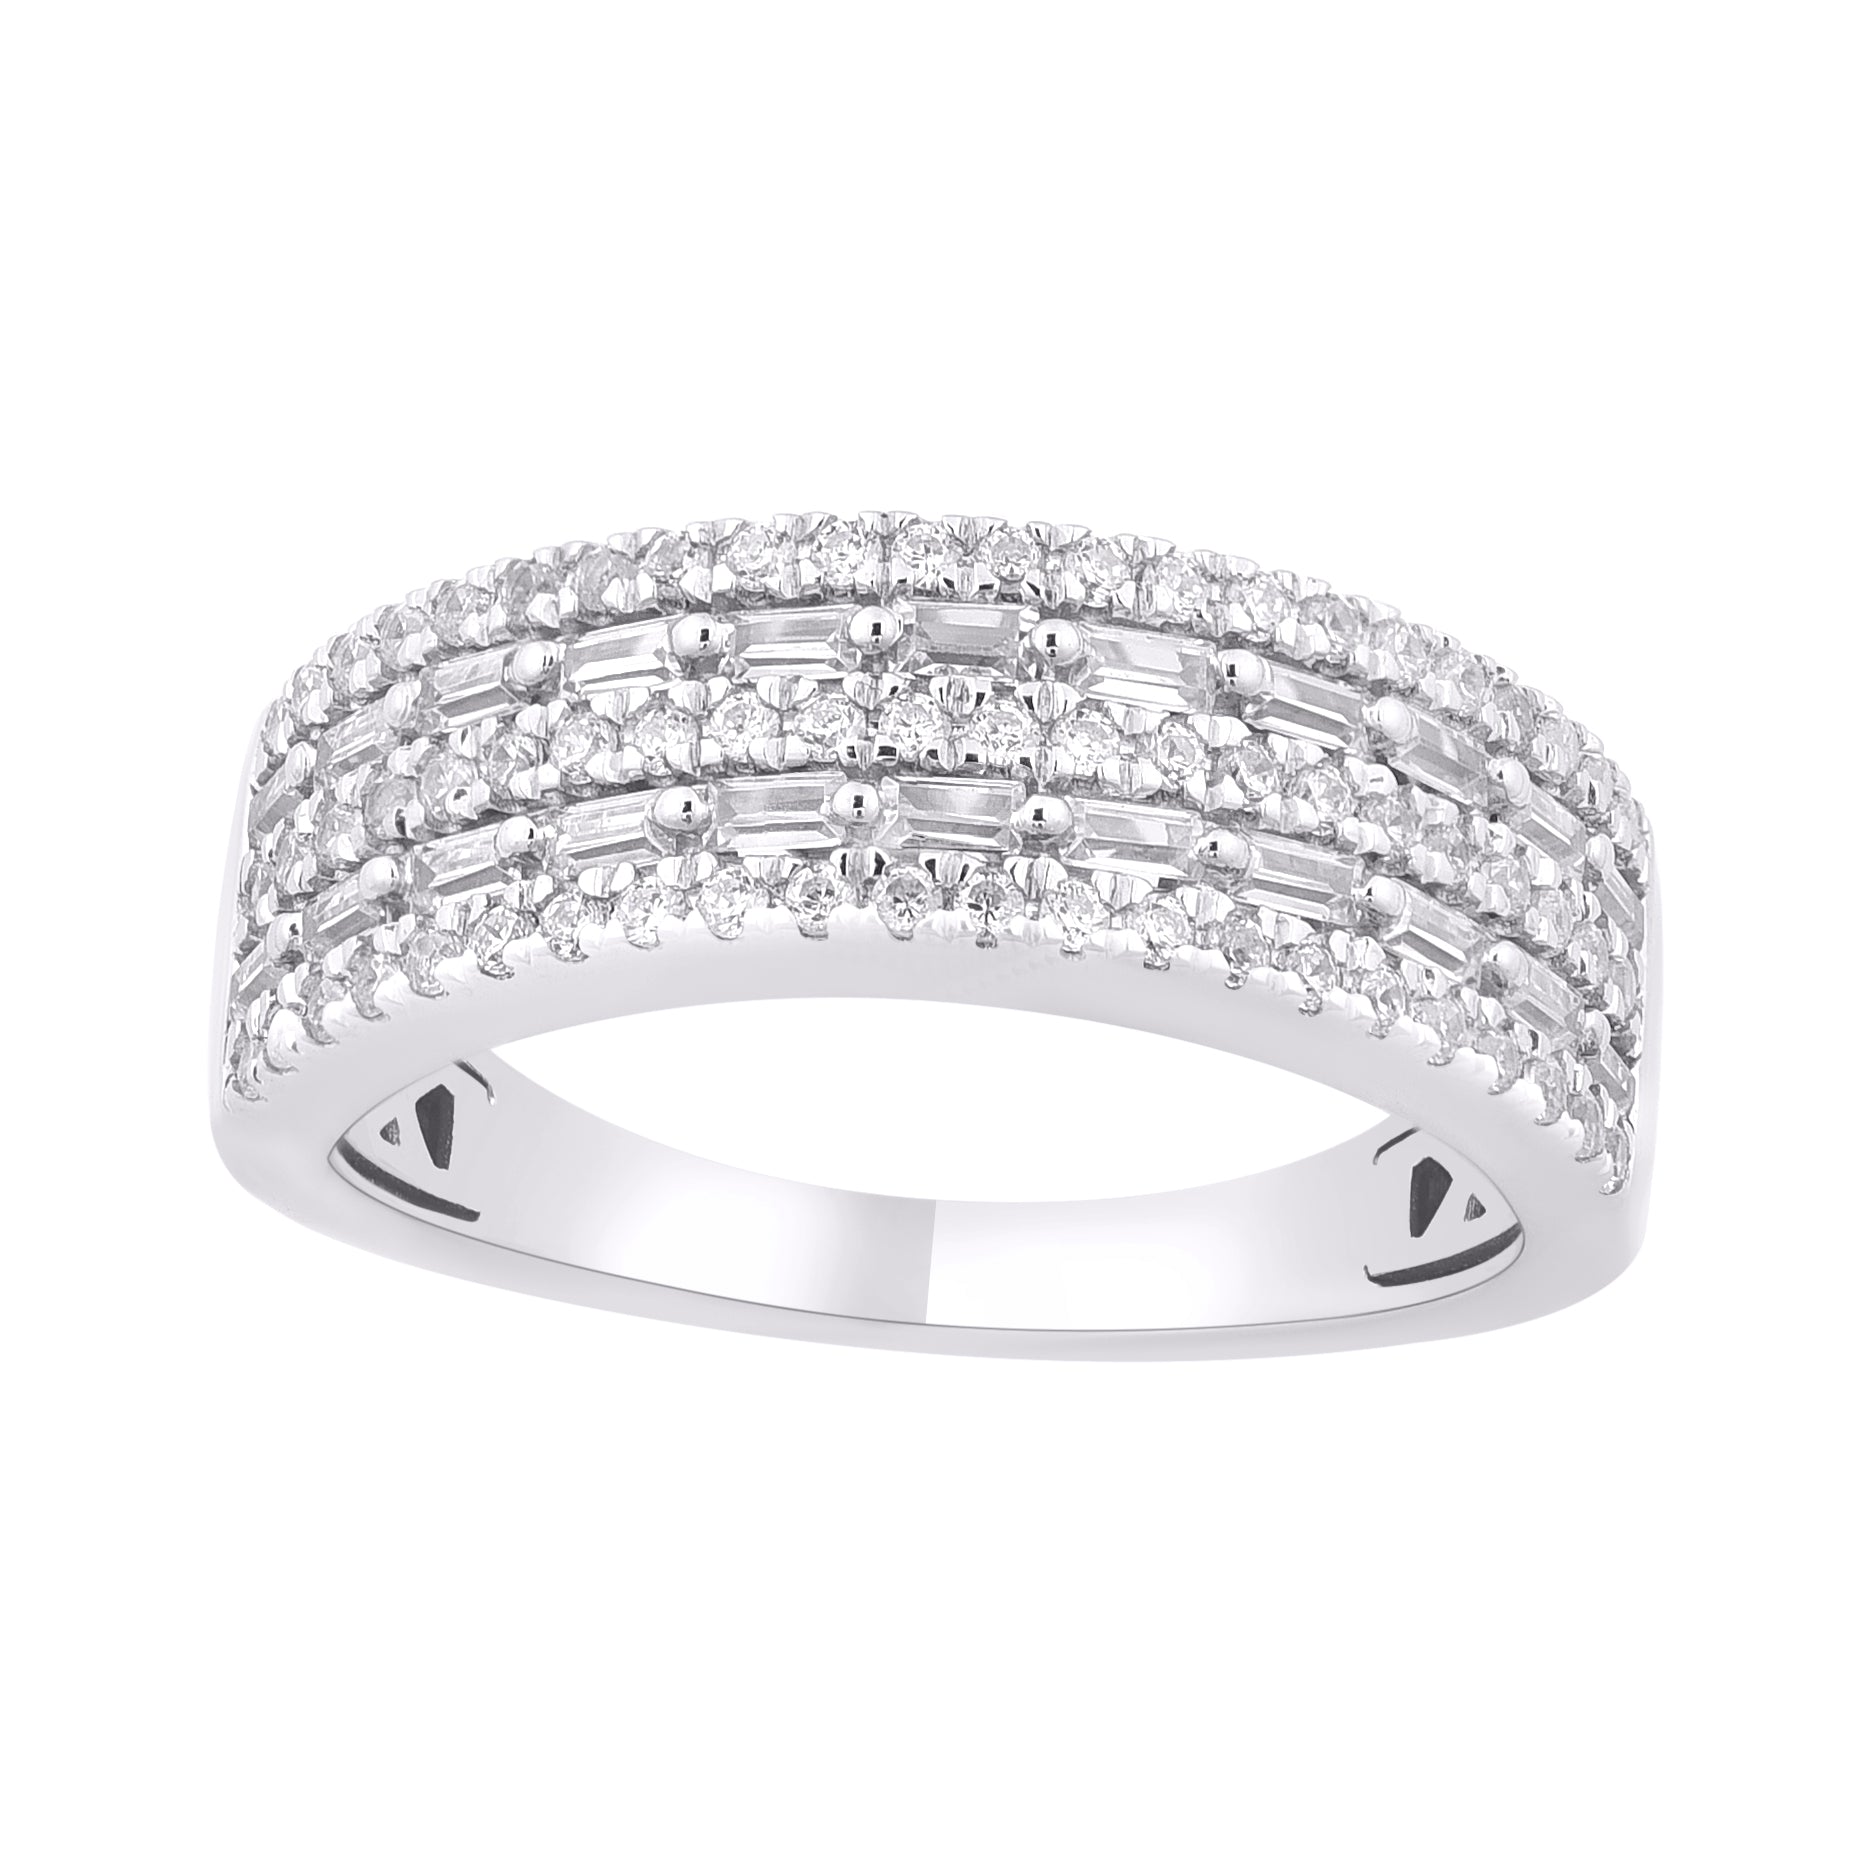 10KT White Gold 0.96 Carat Classic Mens Band-0660002-WG